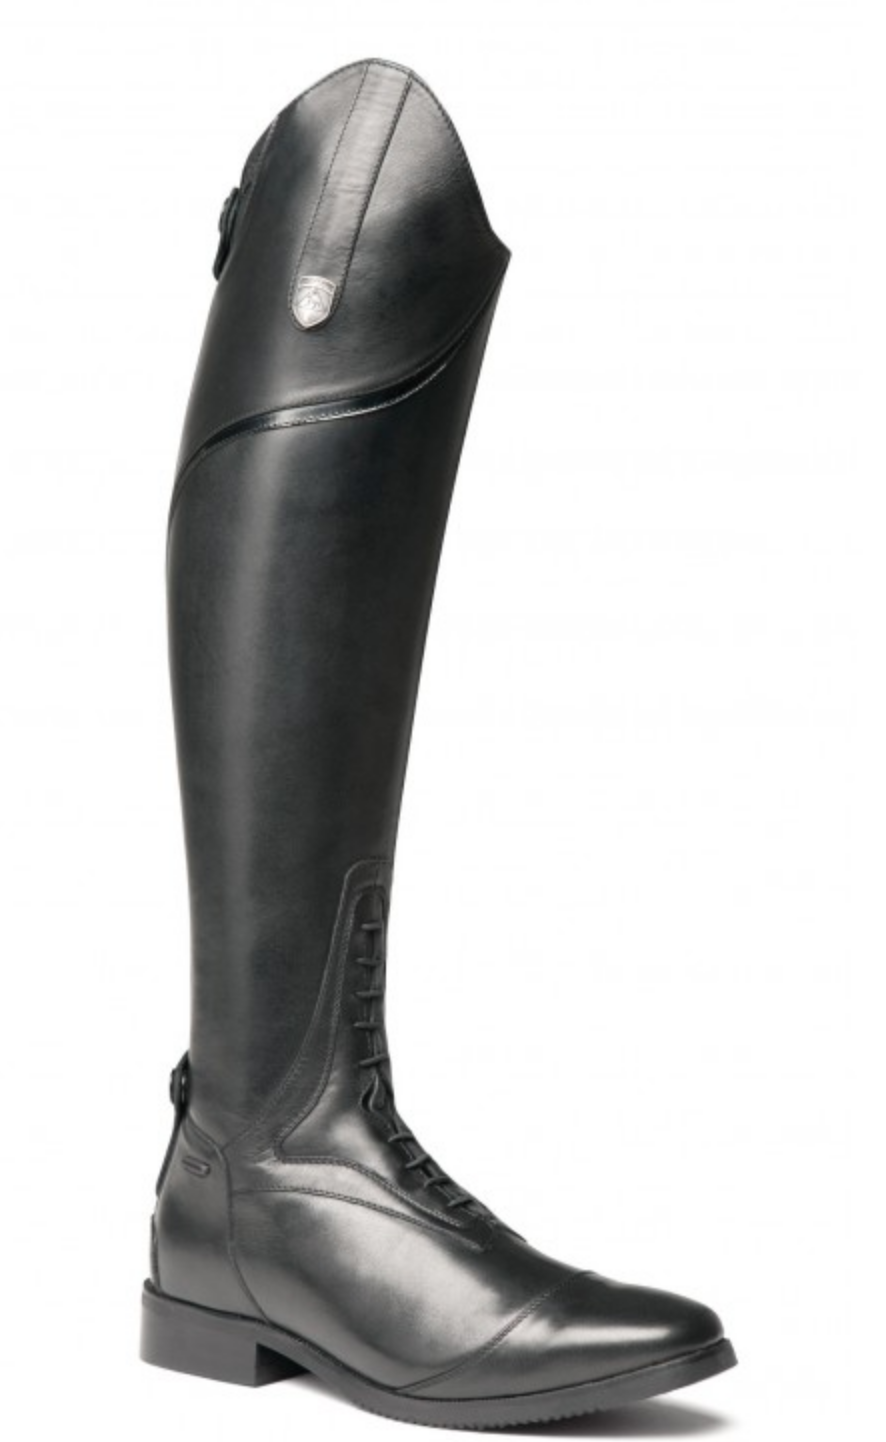 Mountain Horse Sovereign High Rider Hardwearing Grein Leather Double Zip Boots 